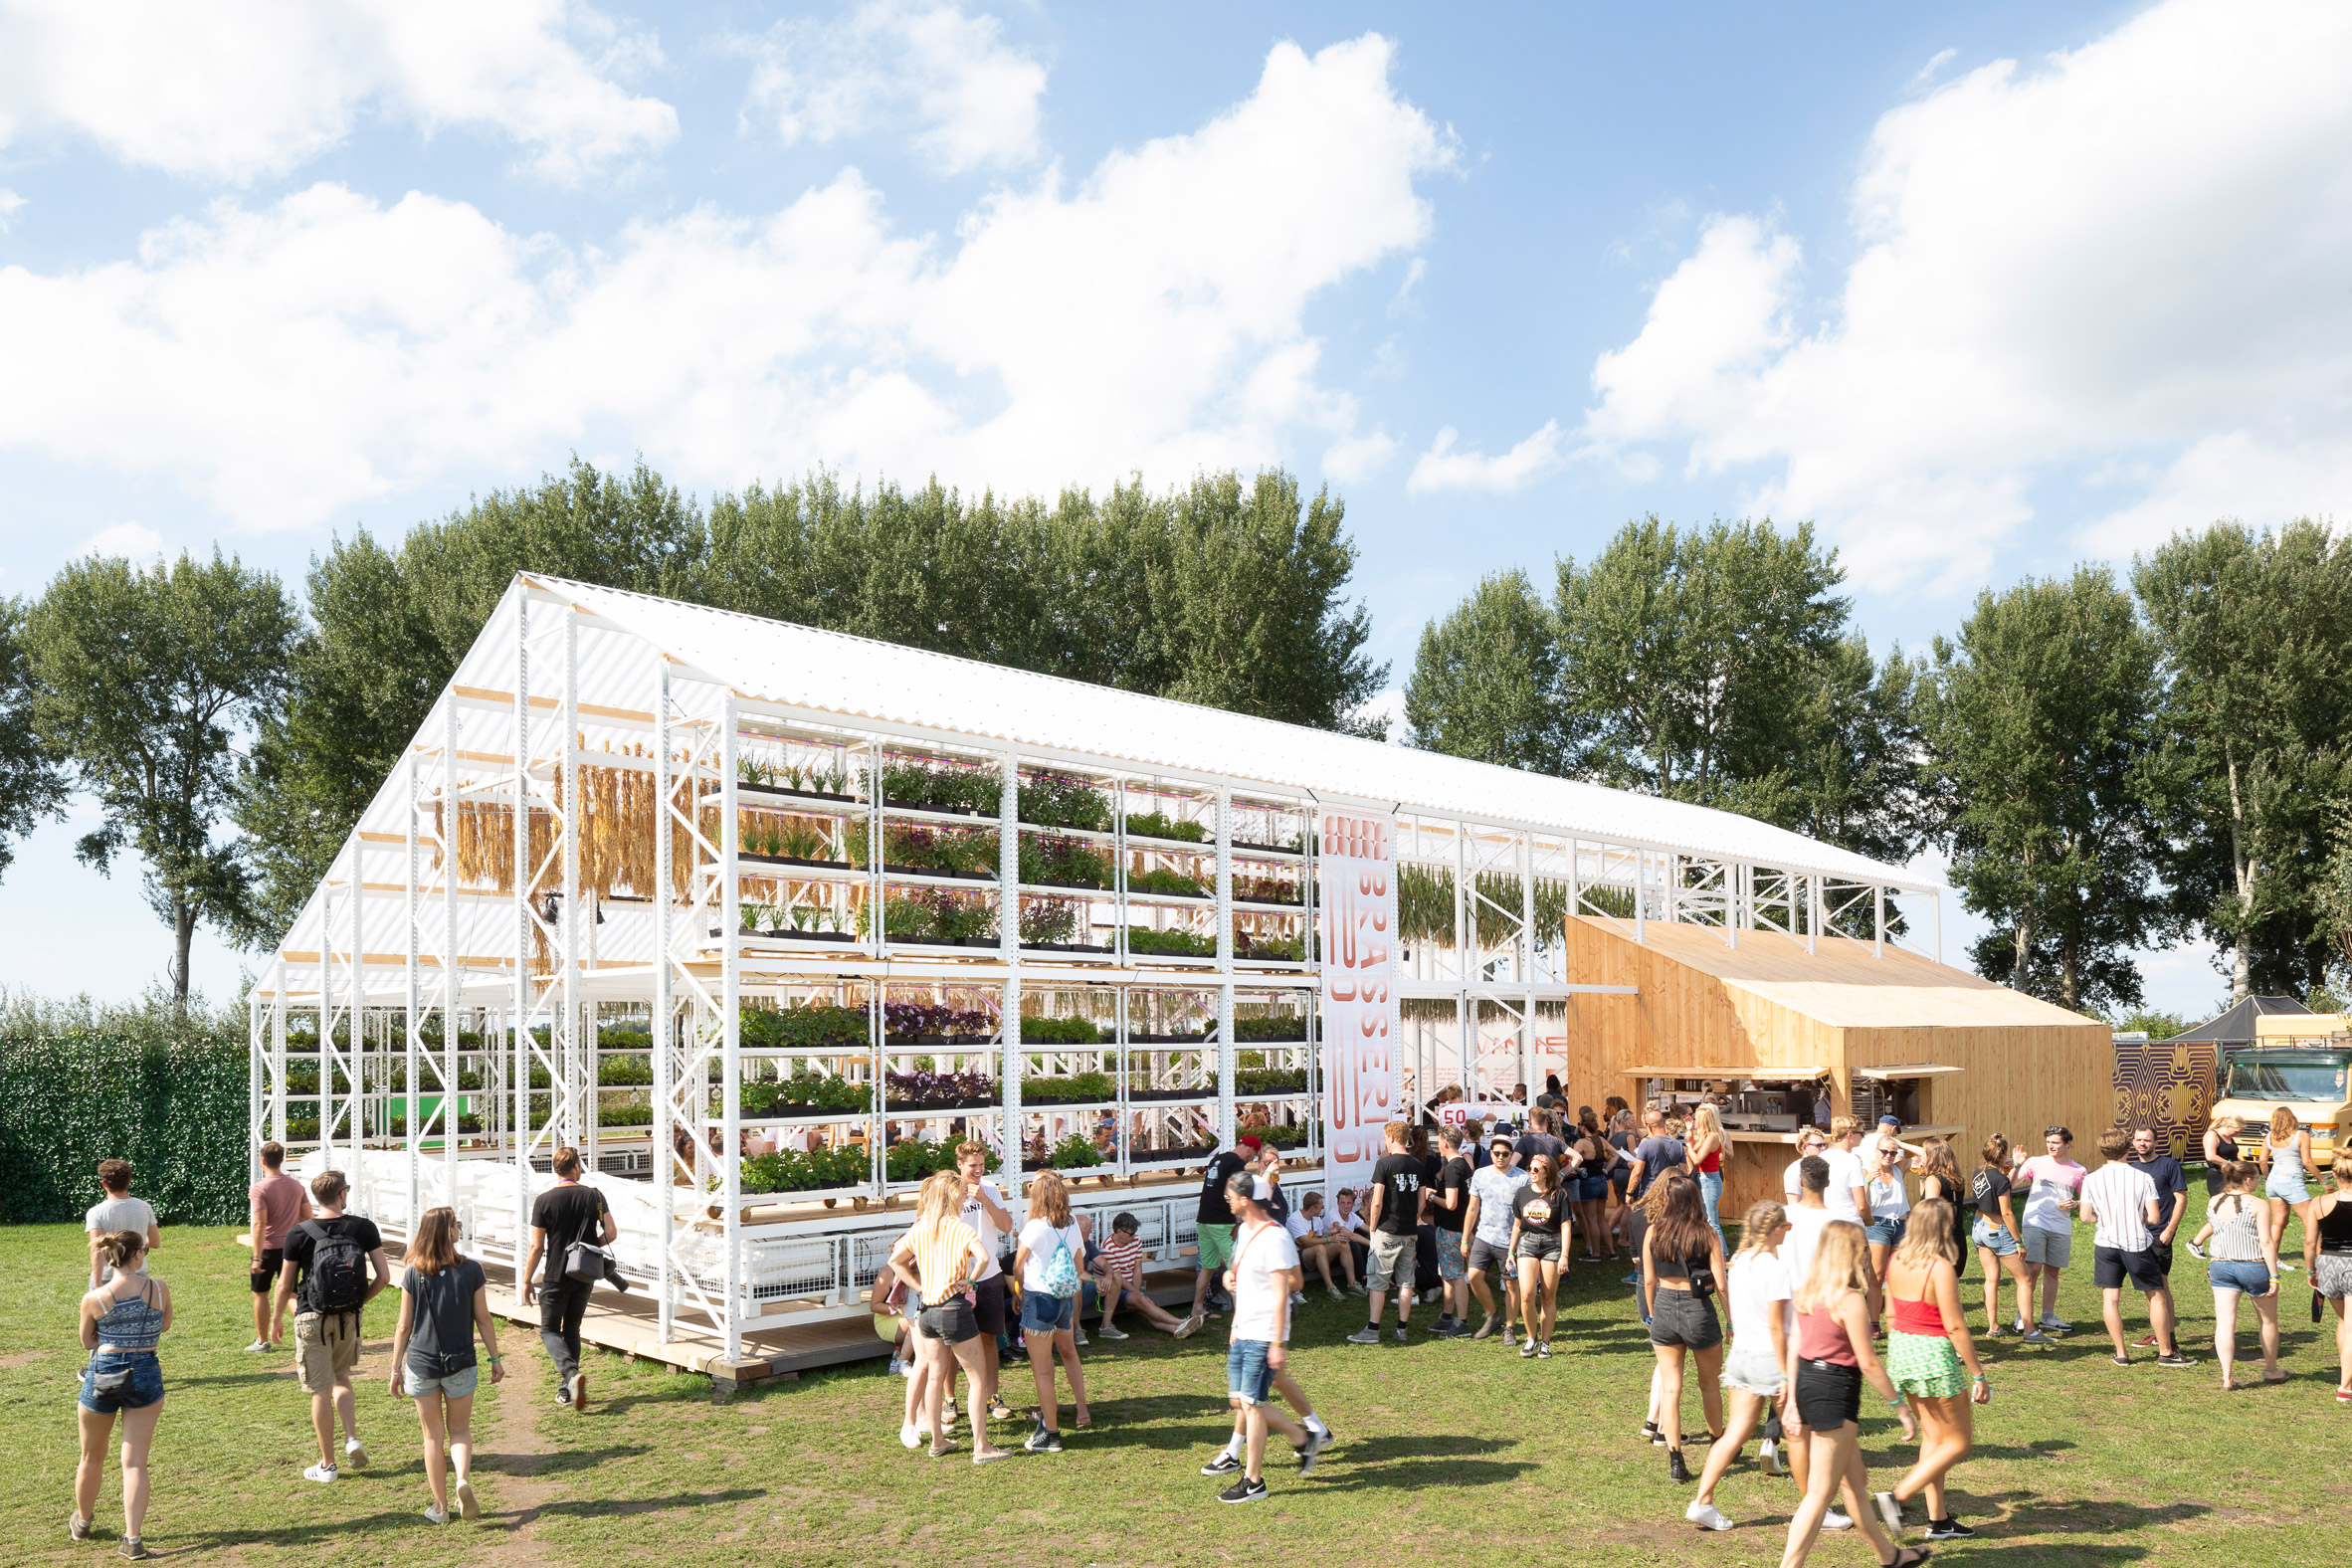 People's Pavilion by Overtreders W